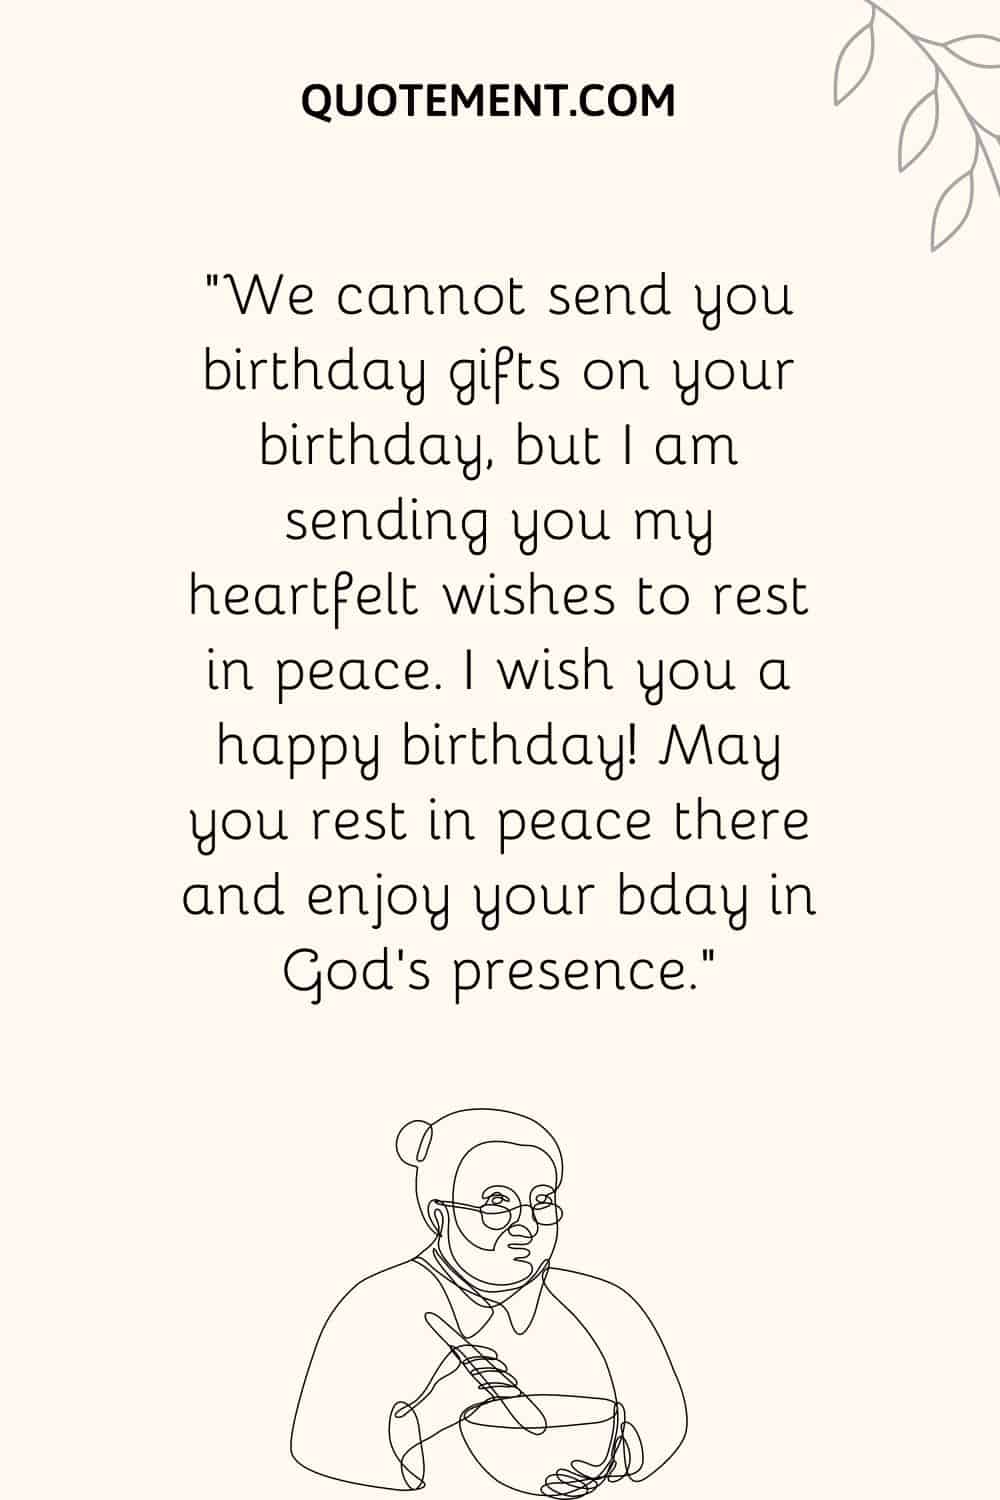 “We cannot send you birthday gifts on your birthday, but I am sending you my heartfelt wishes to rest in peace.